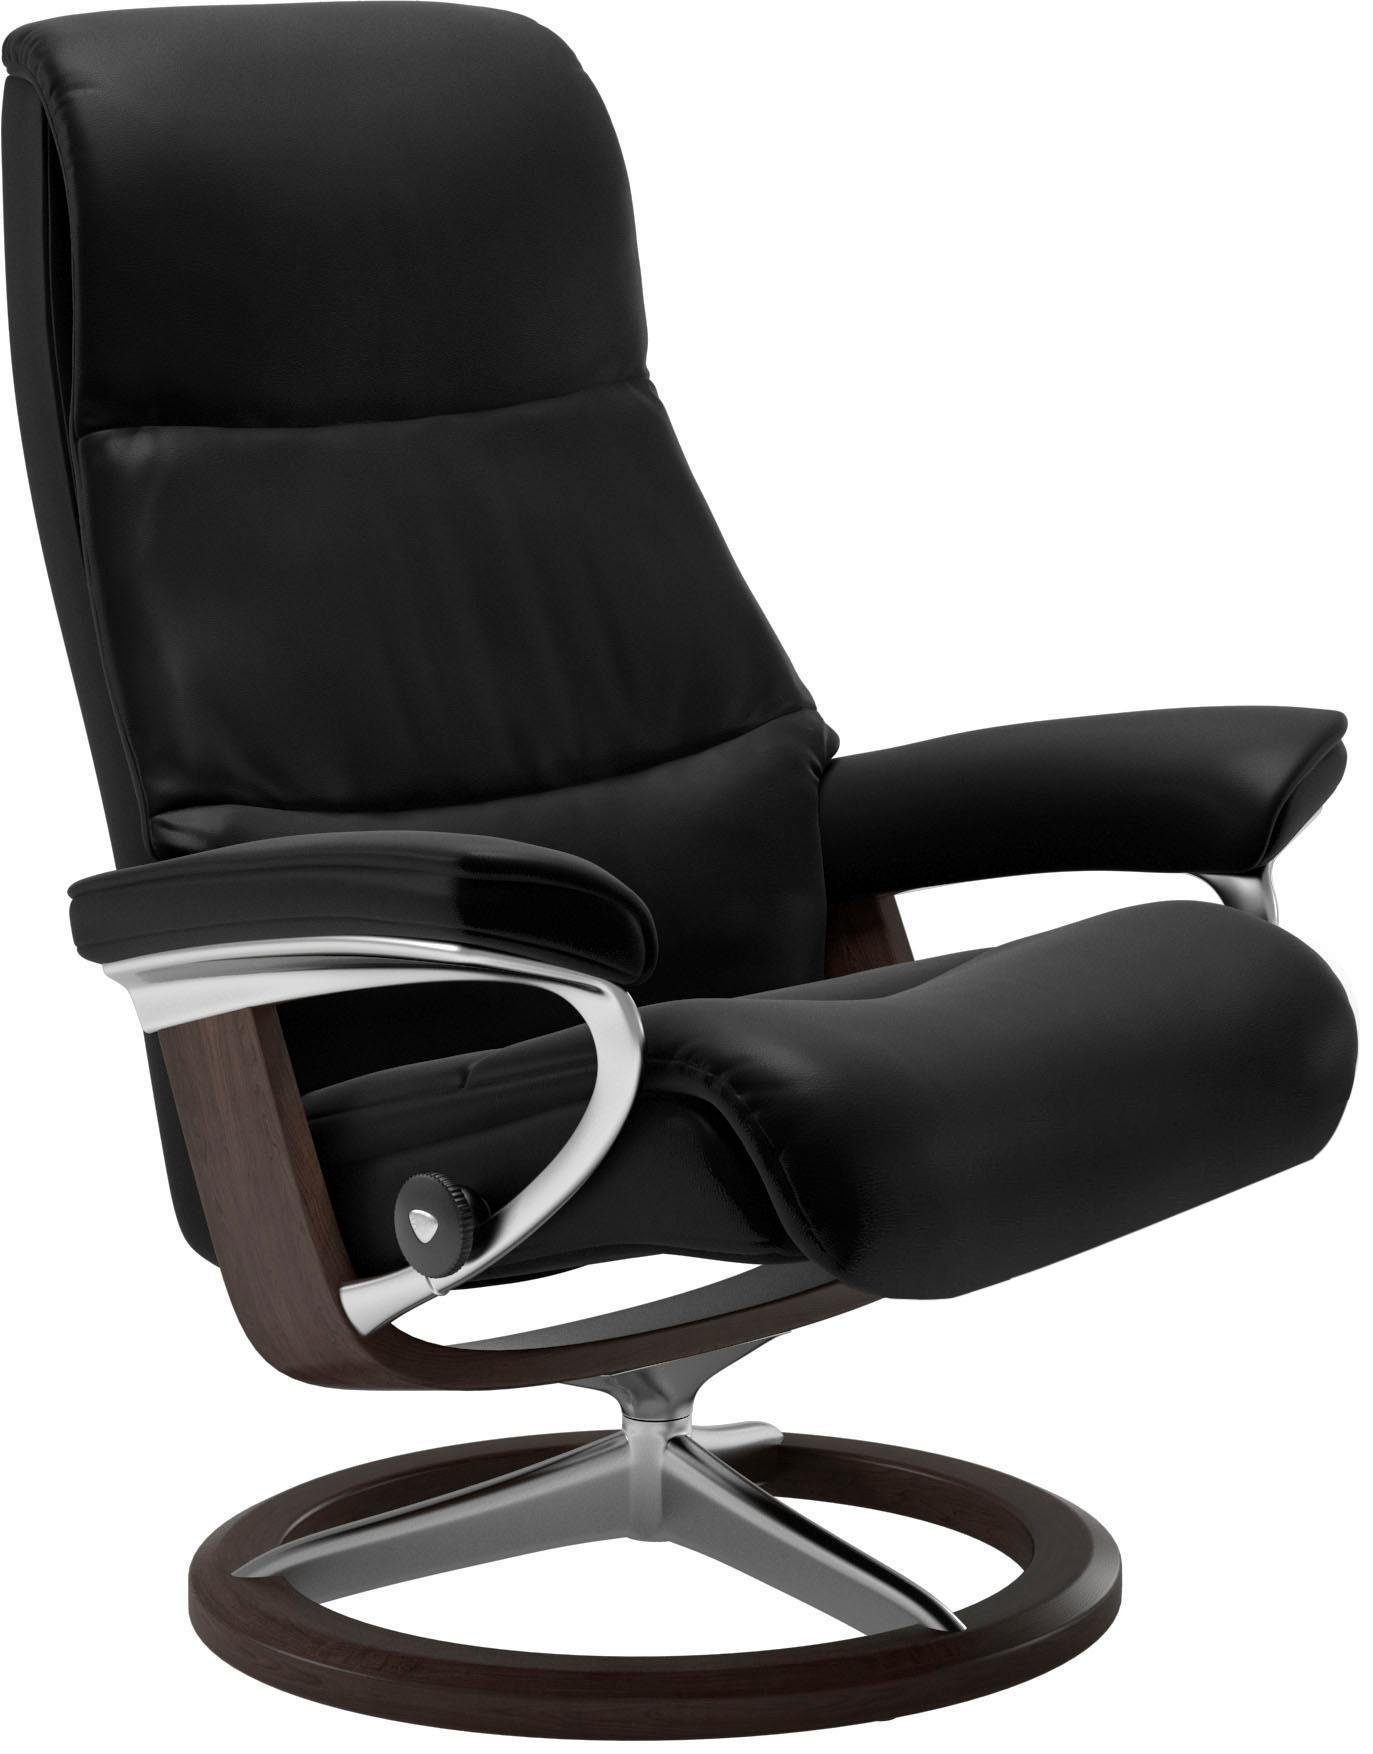 Größe Relaxsessel mit Signature Wenge Base, View, L,Gestell Stressless®